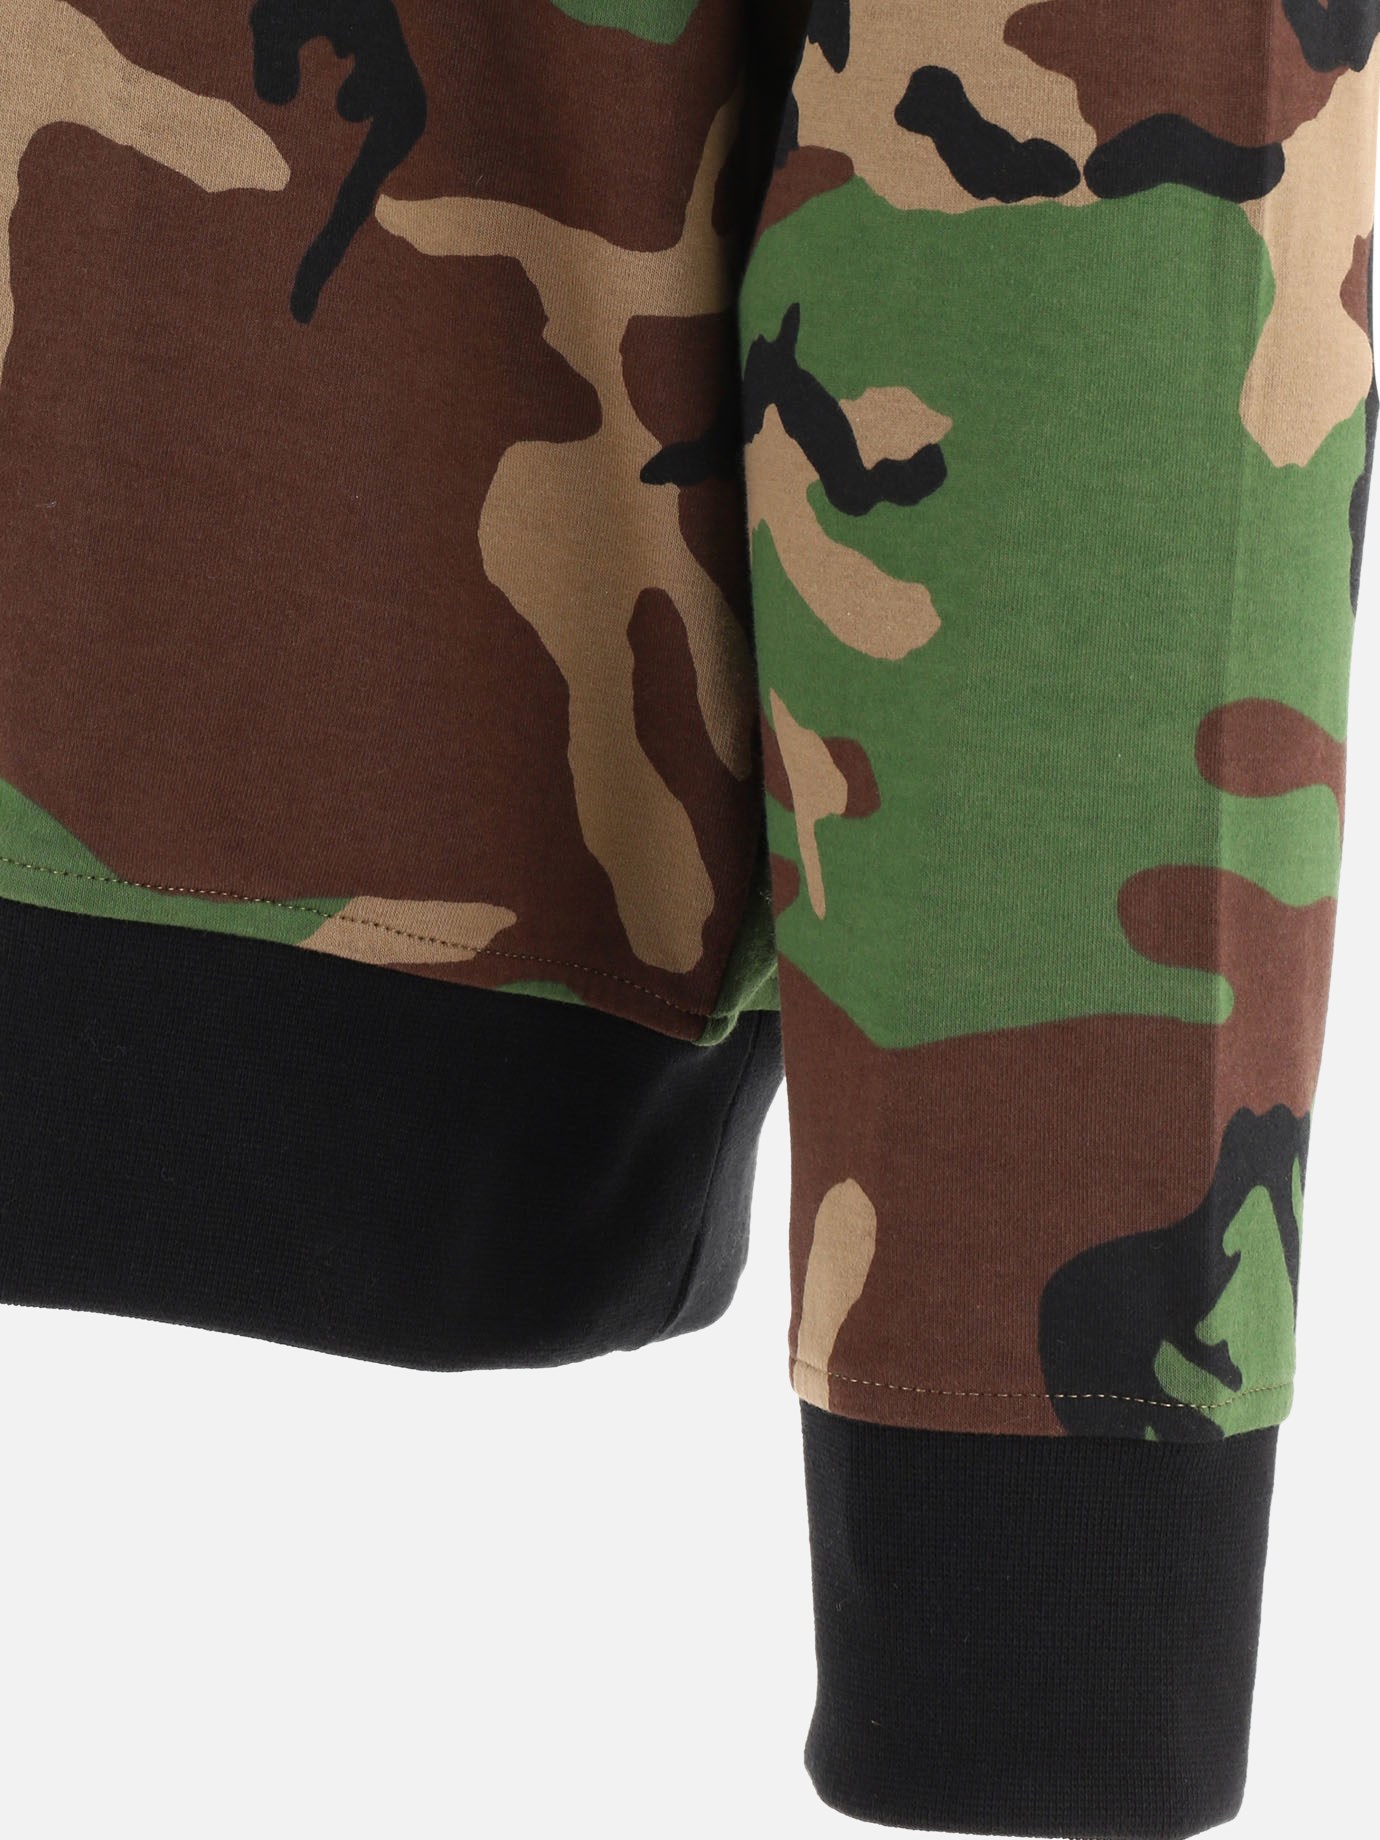  Pony  camouflage hoodie by Polo Ralph Lauren